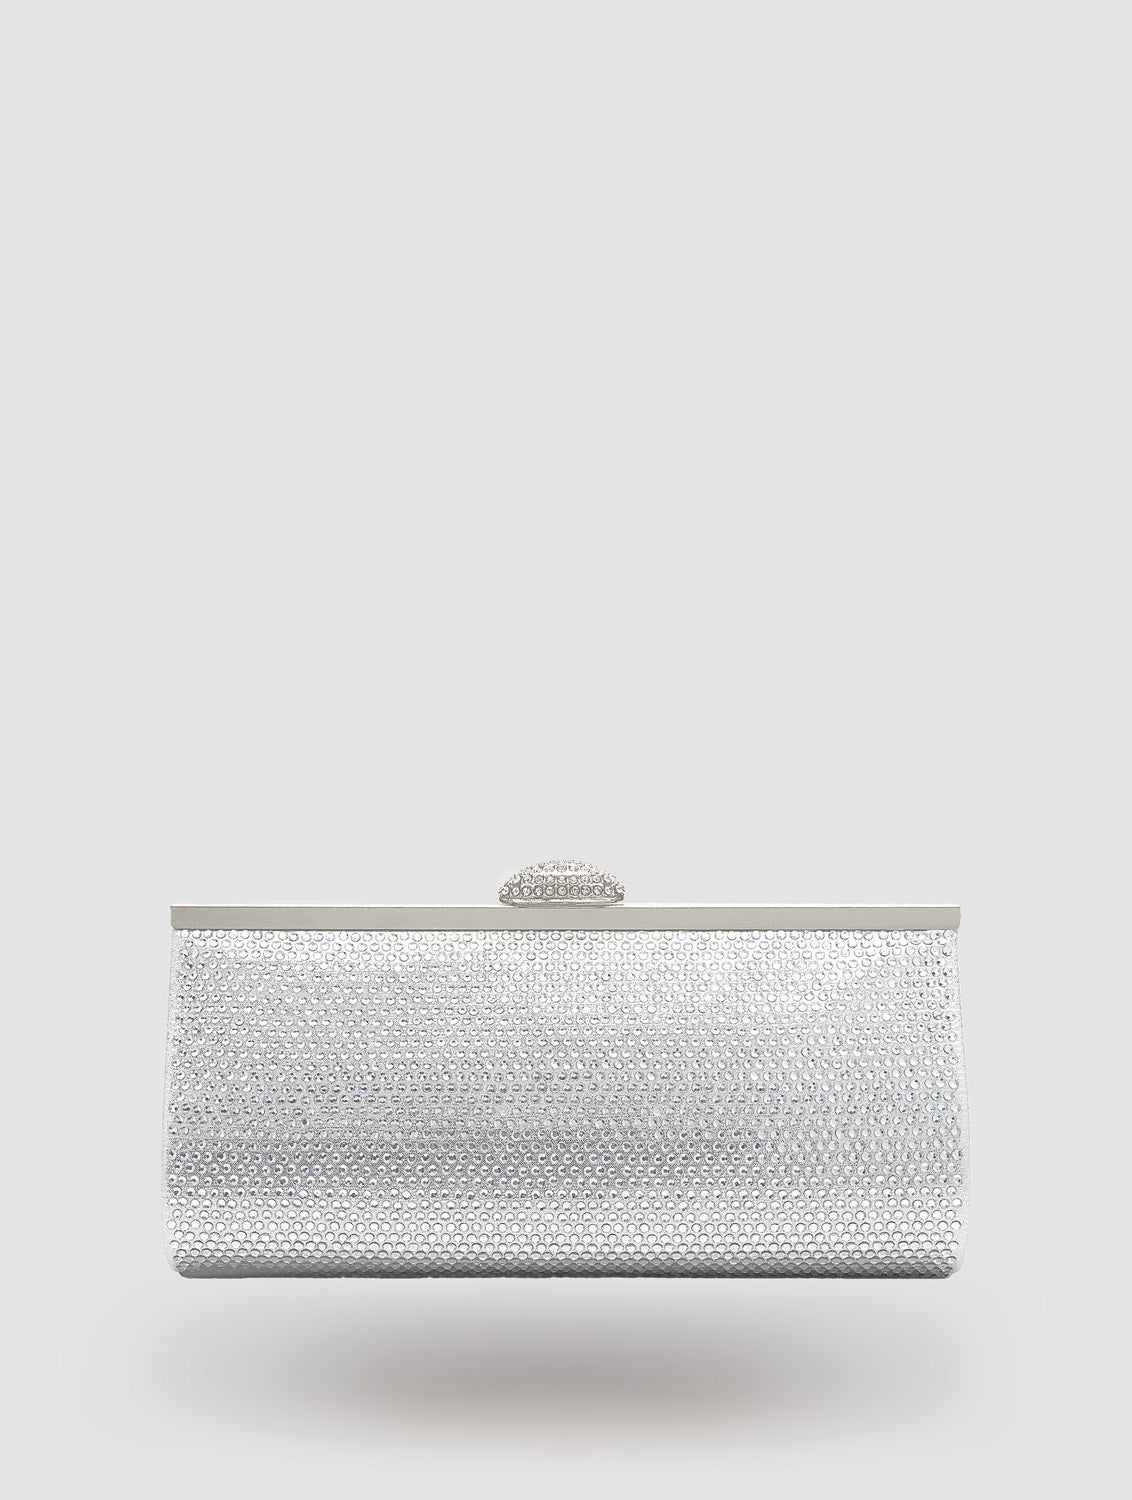 Long Jewelled Minaudiere With Top Closure